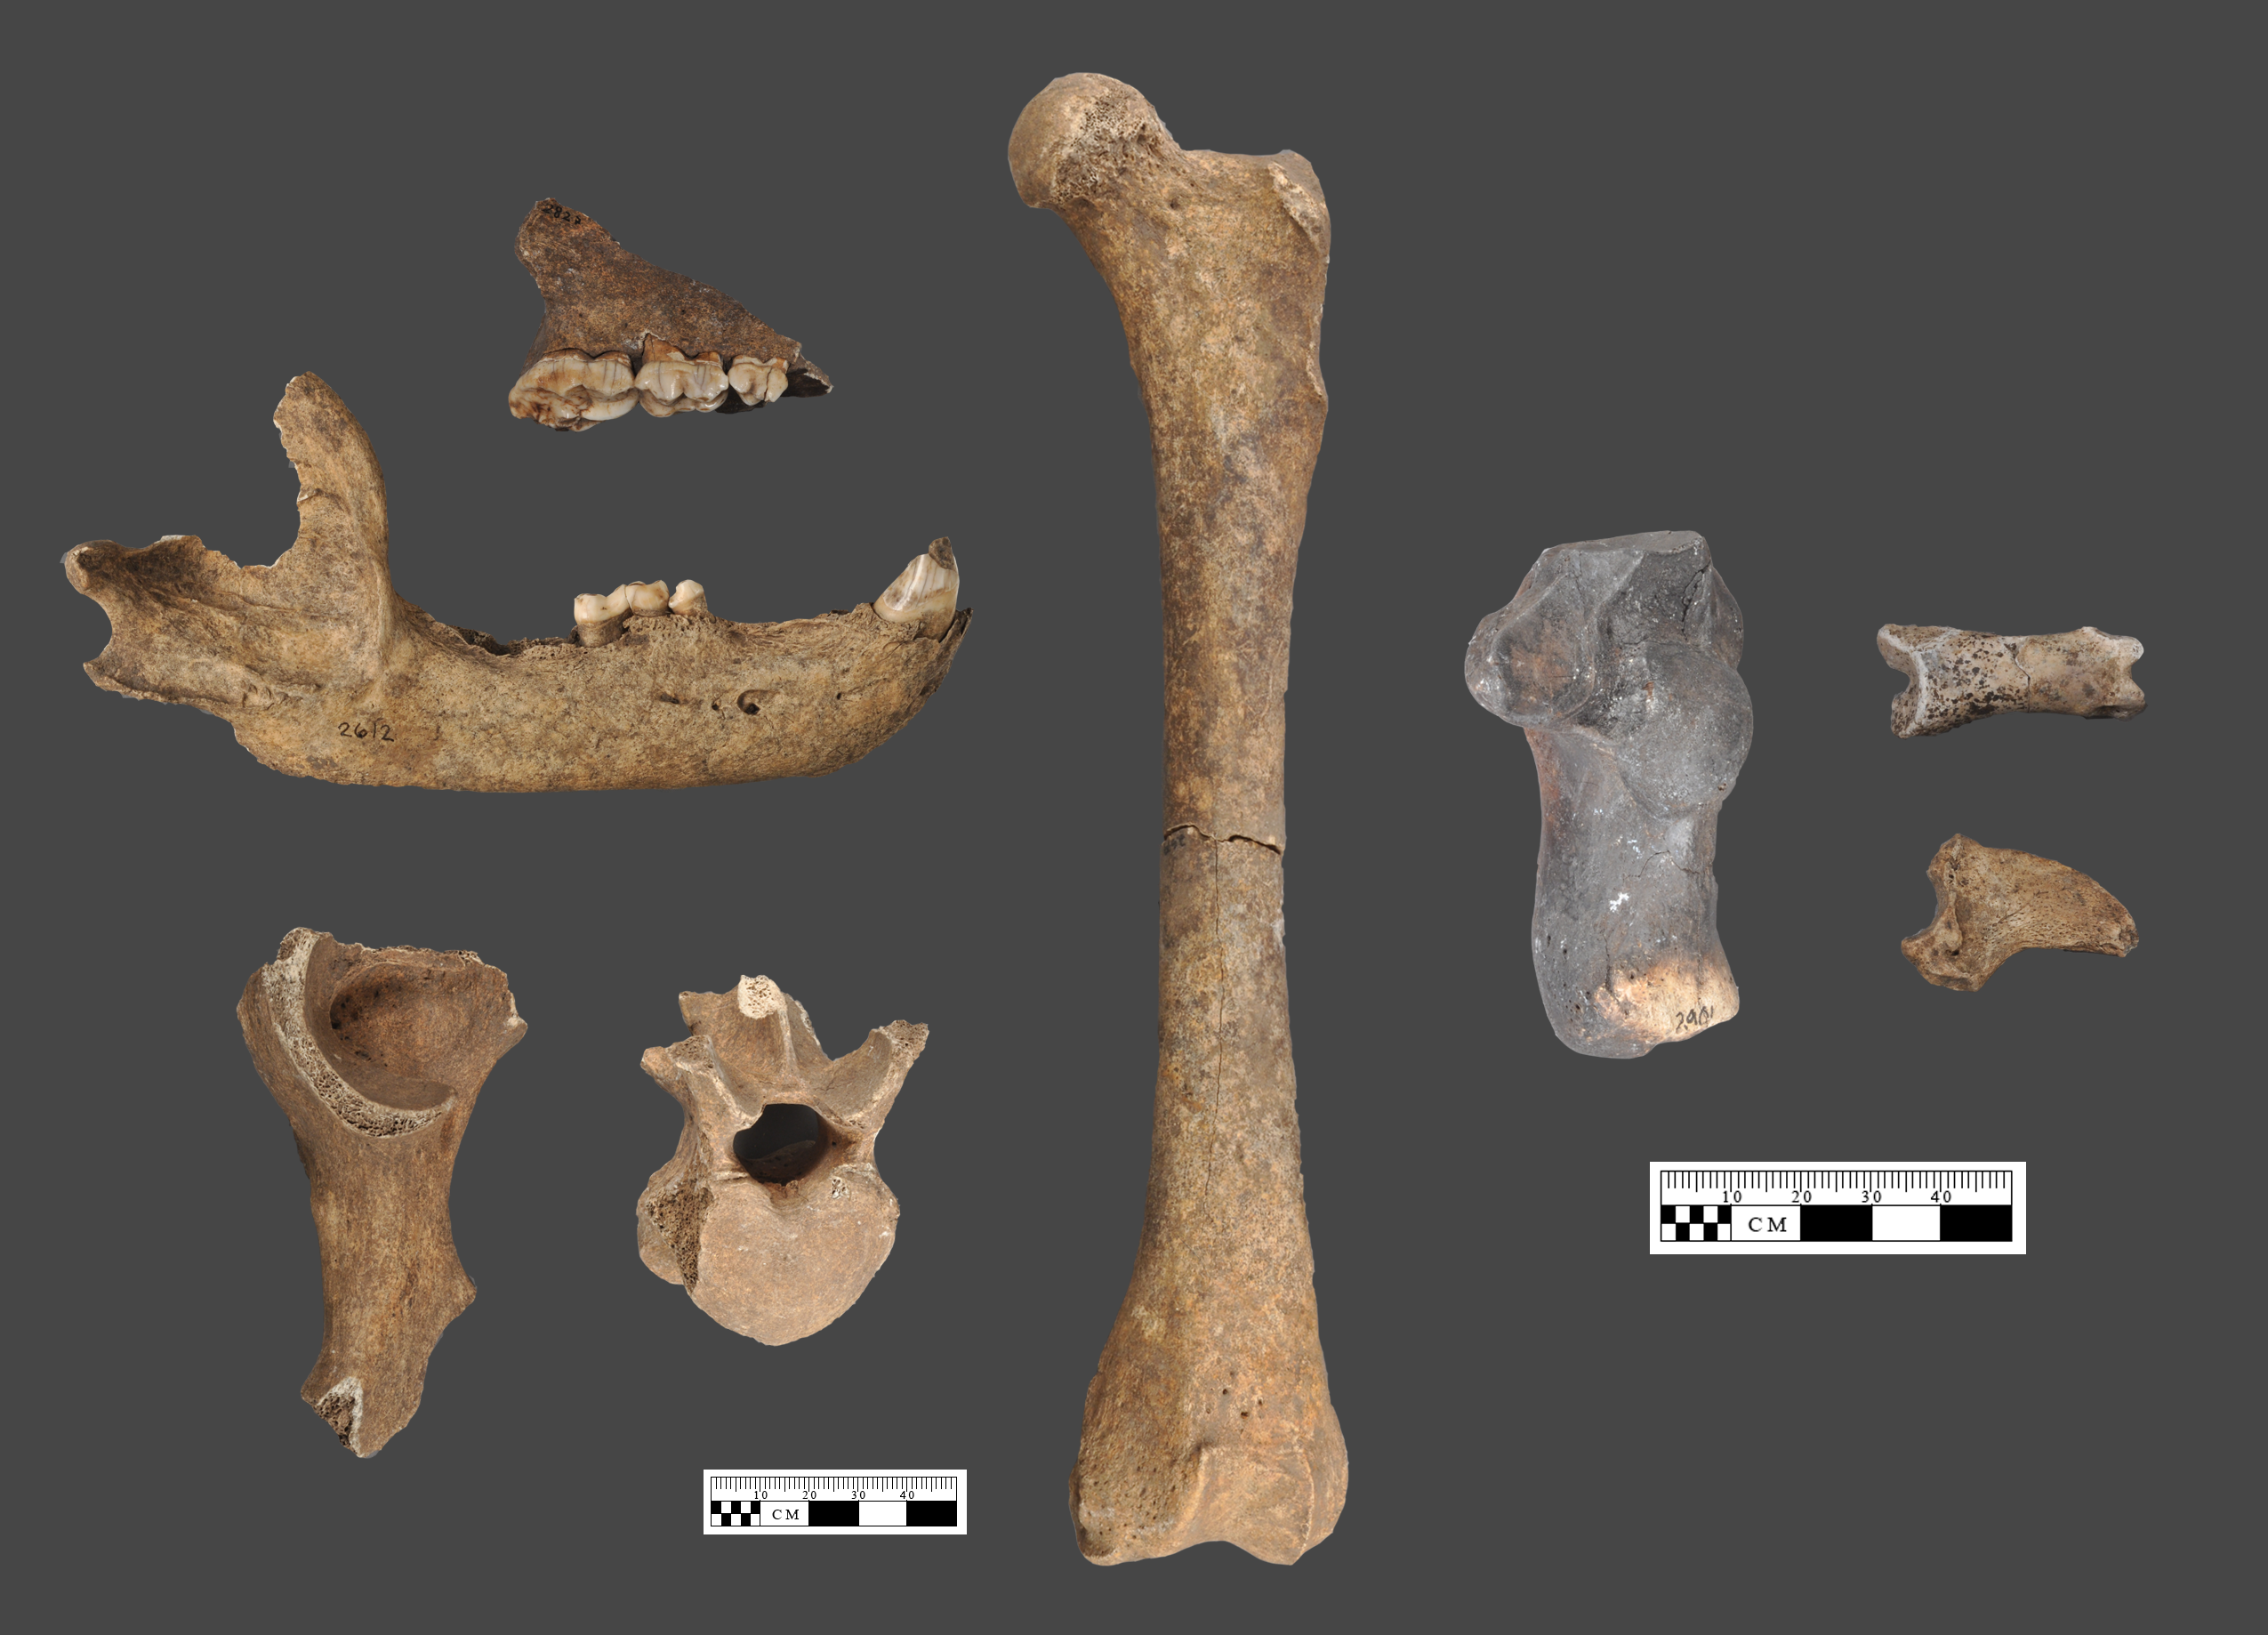 eight bear bones including a jaw bone and teeth displayed next to measurement tools